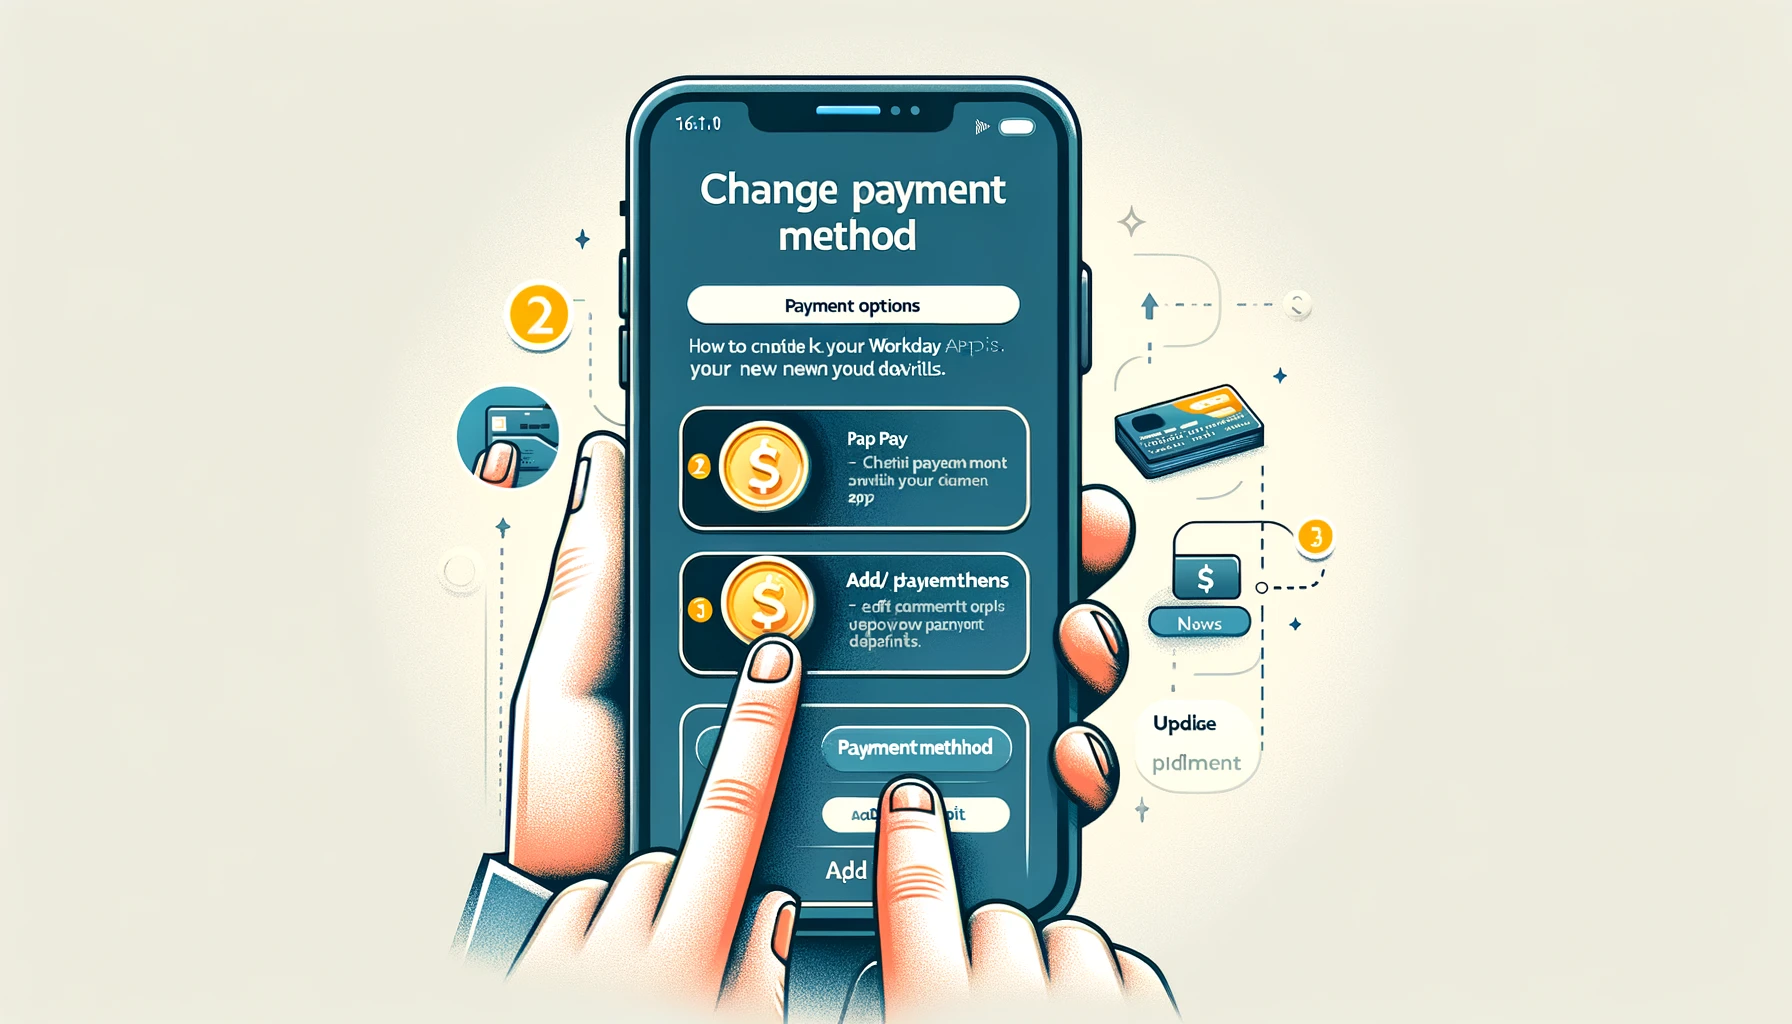 How to Change Payment Method on Workday App